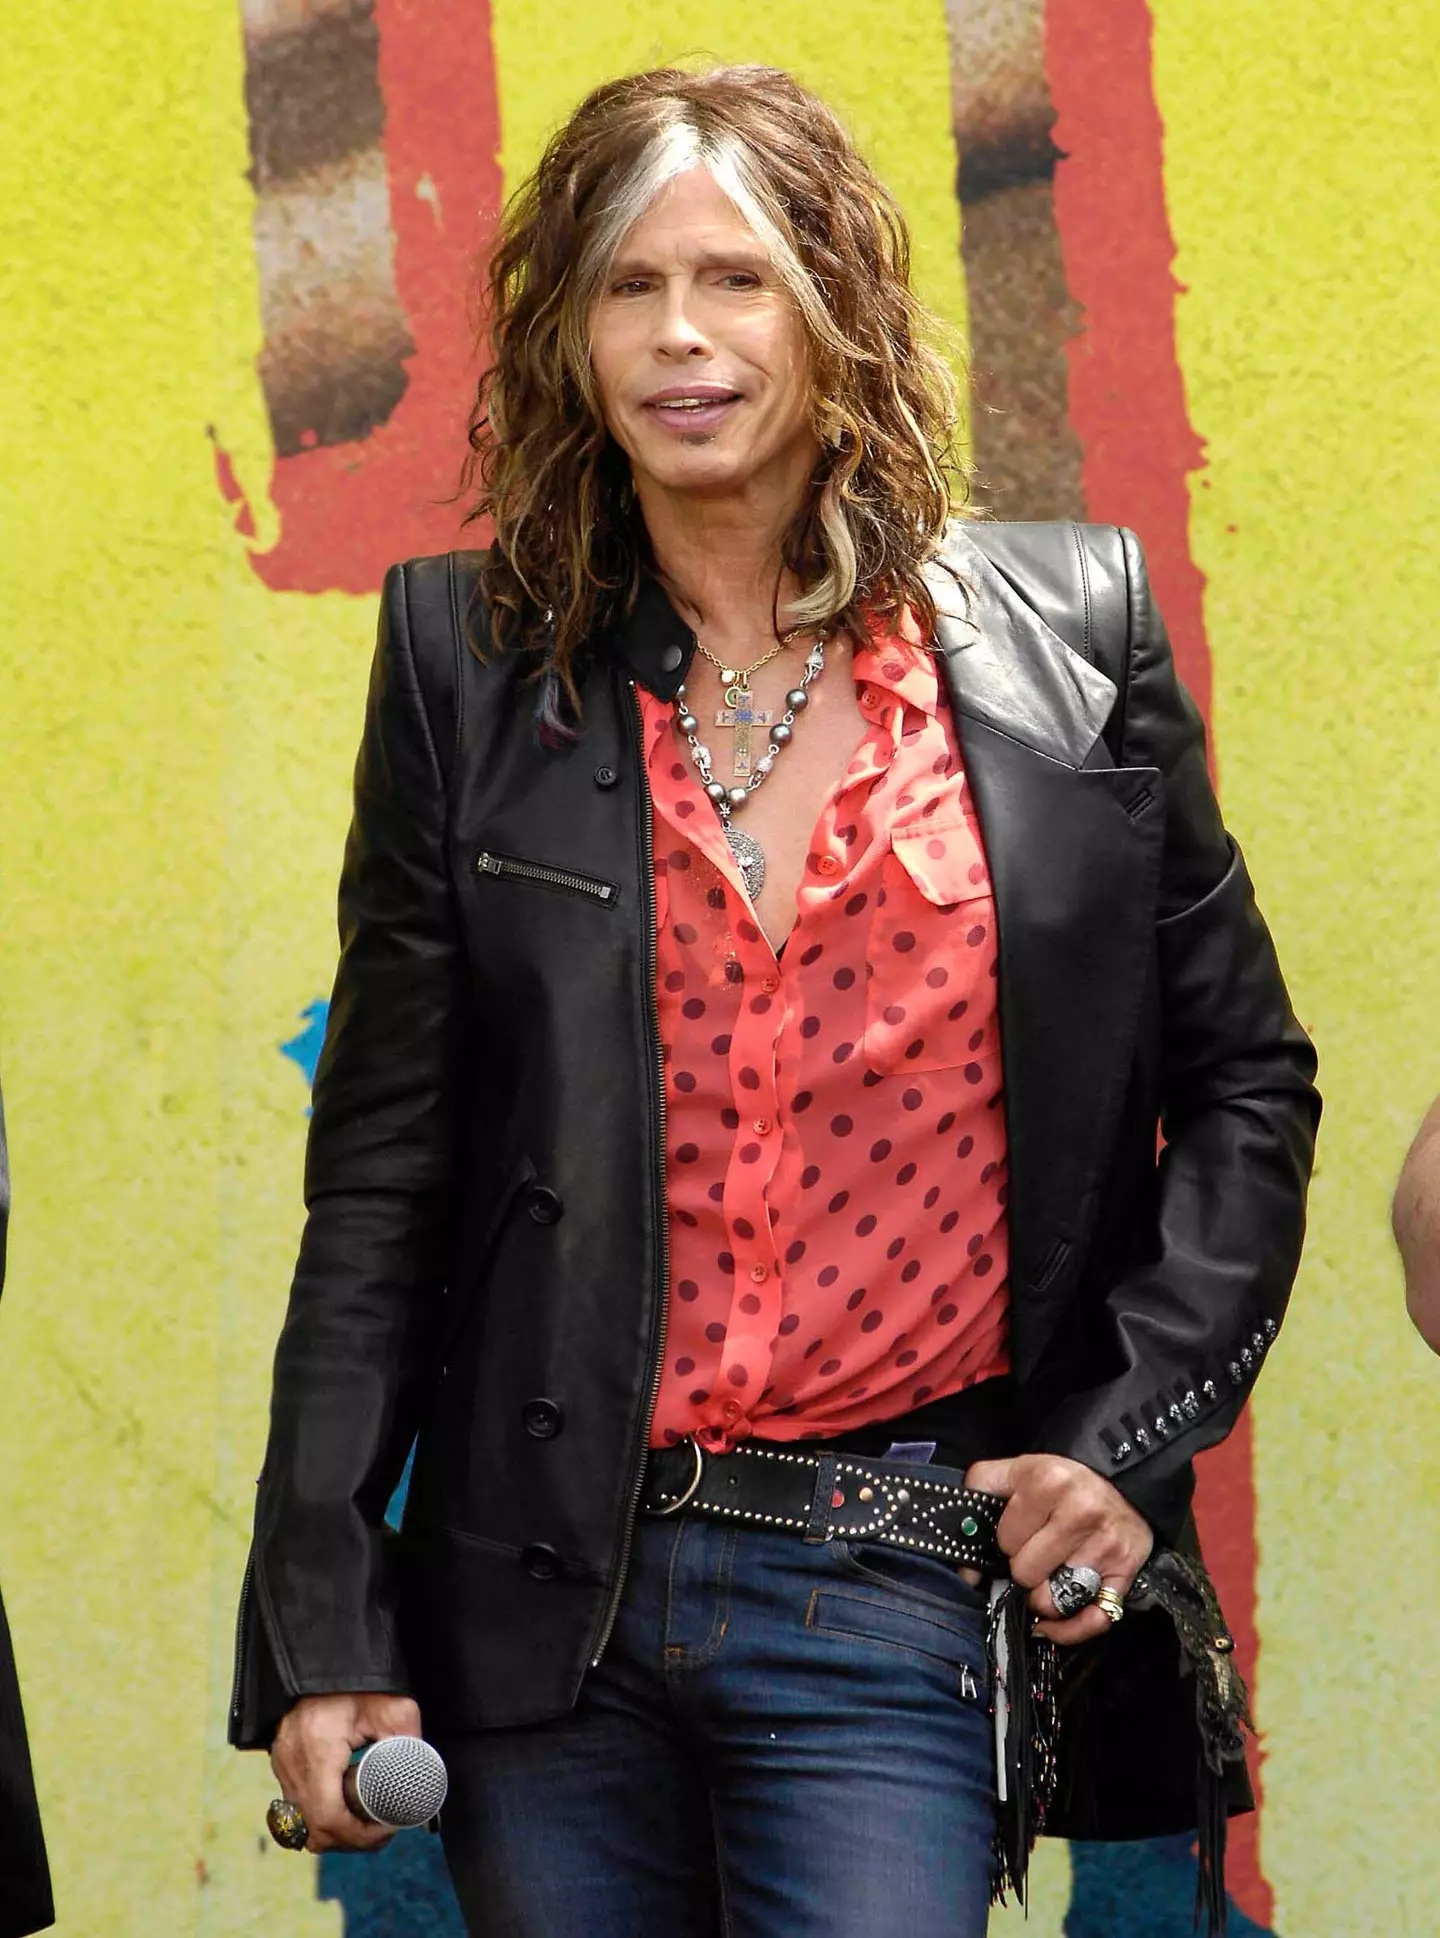 Steven Tyler has filed another response against the allegations.